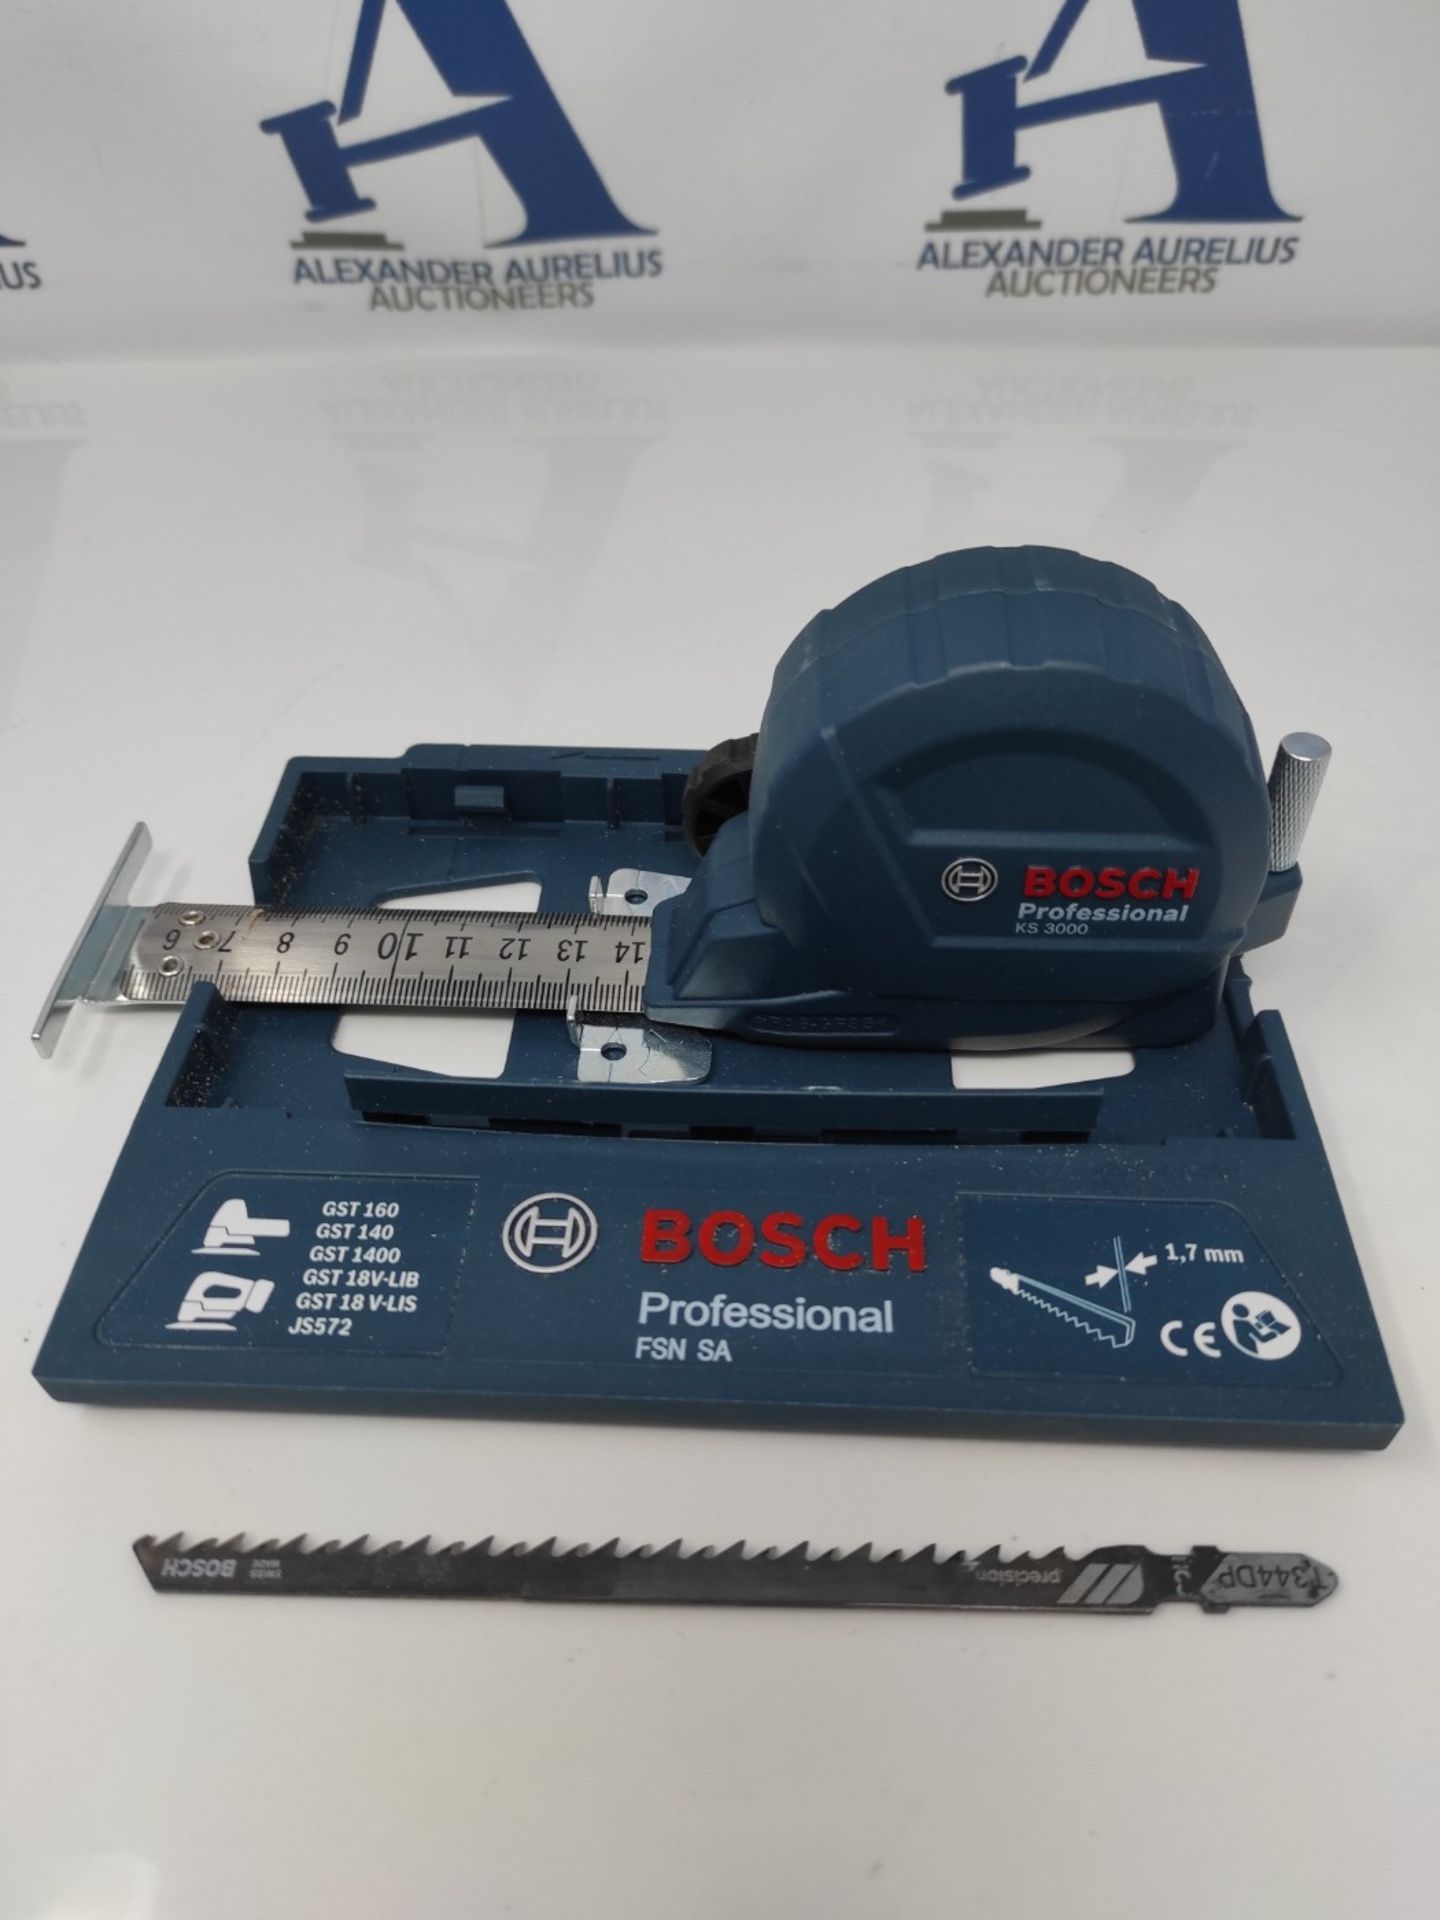 RRP £65.00 Bosch Professional Jigsaw Accessory Set KS 3000 + FSN SA (with tape measure and adapte - Image 3 of 3